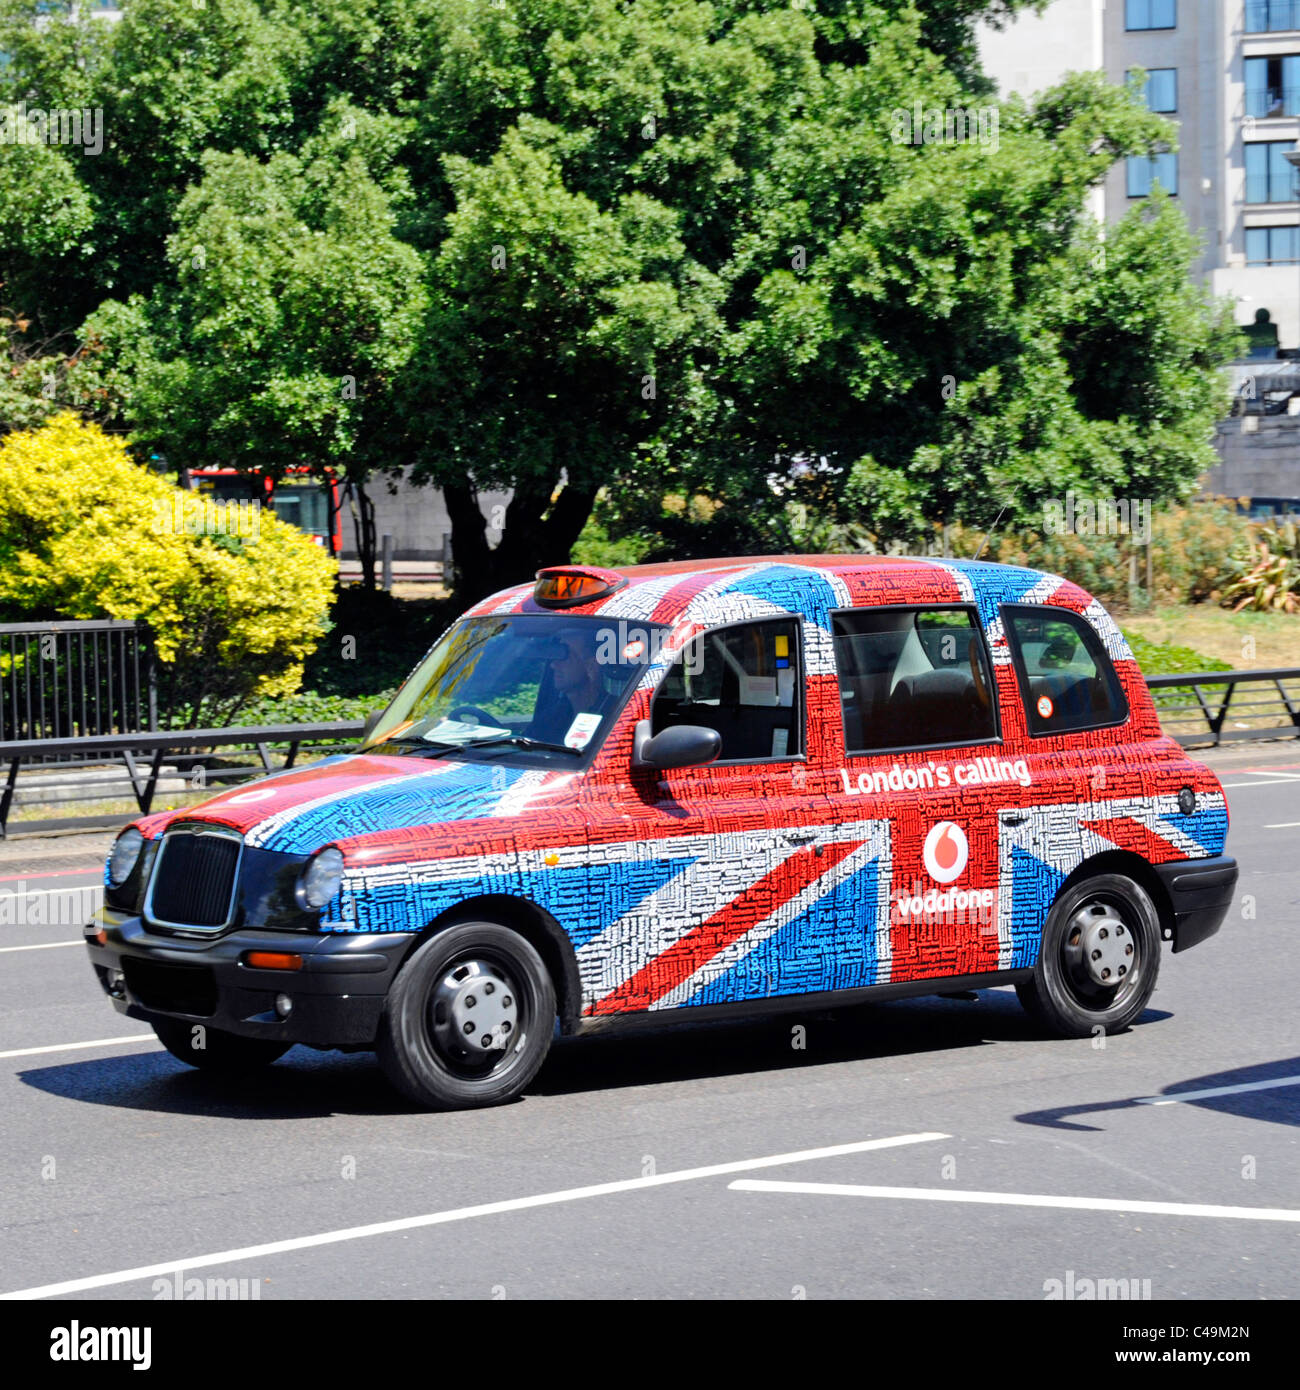 Street scene side view black Taxi cab temporary covered Vodafone London Calling Union Jack flag & text tag word cloud advertising graphic England UK Stock Photo